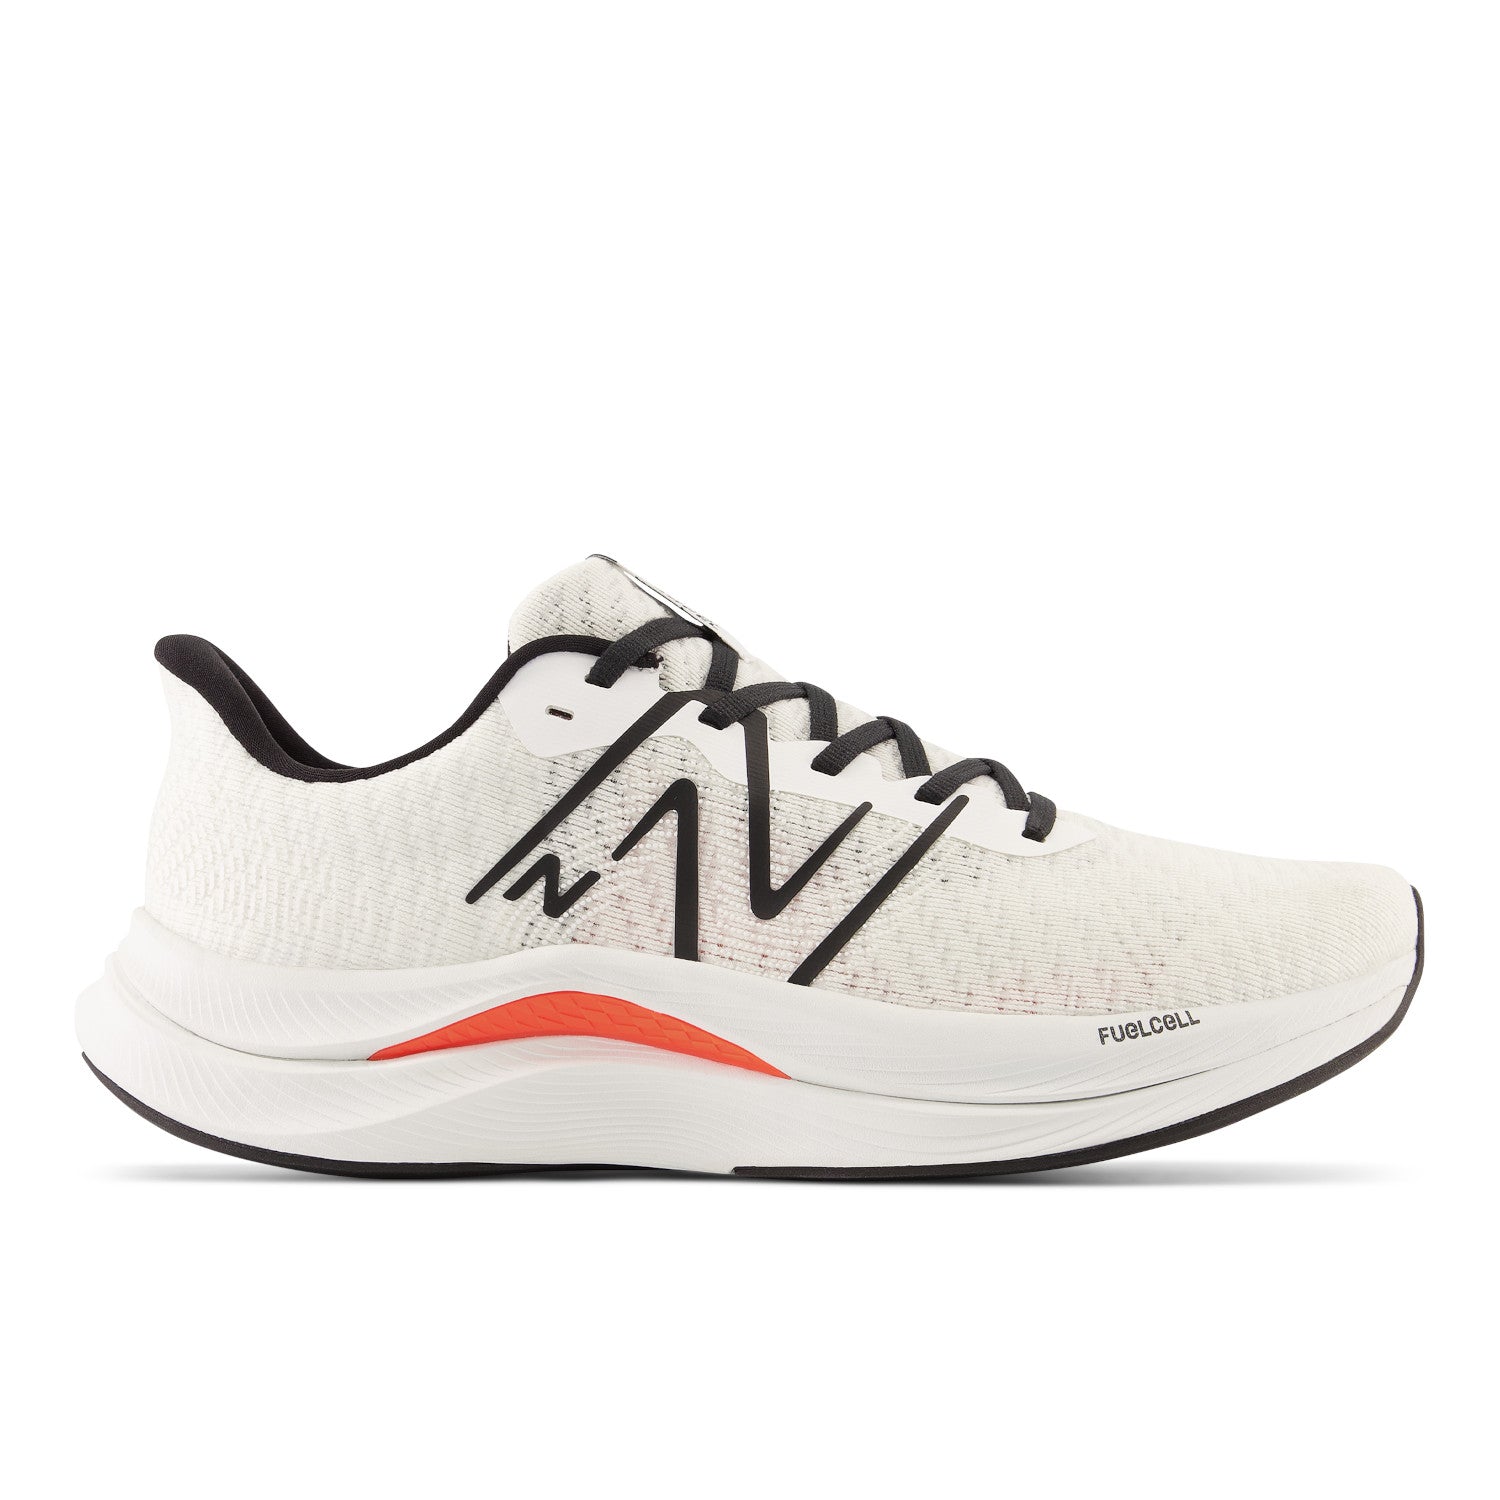 New Balance FuelCell Propel v4 MFCPRLW4 Men's1